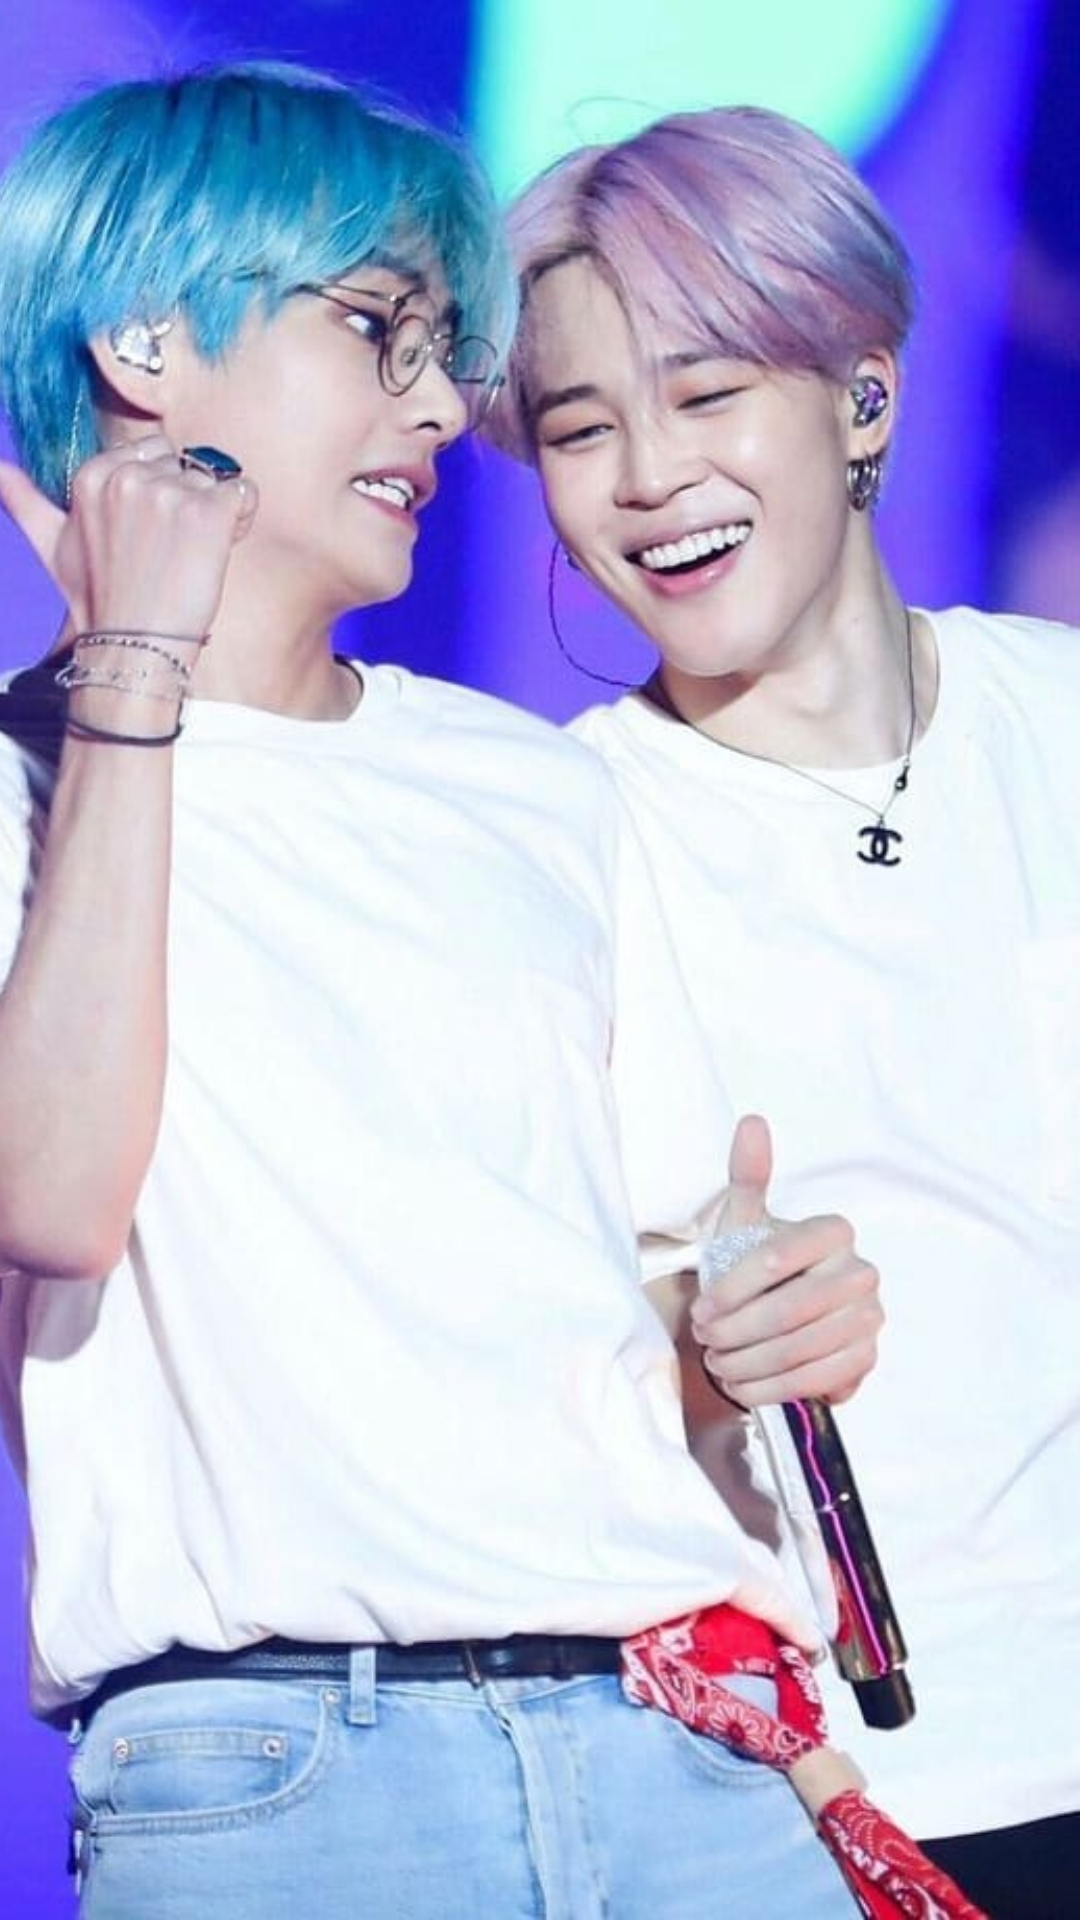 Jimin And Bts V Aka Kim Taehyung'S Cutest Moments That Make Armys' Hearts  Flutter